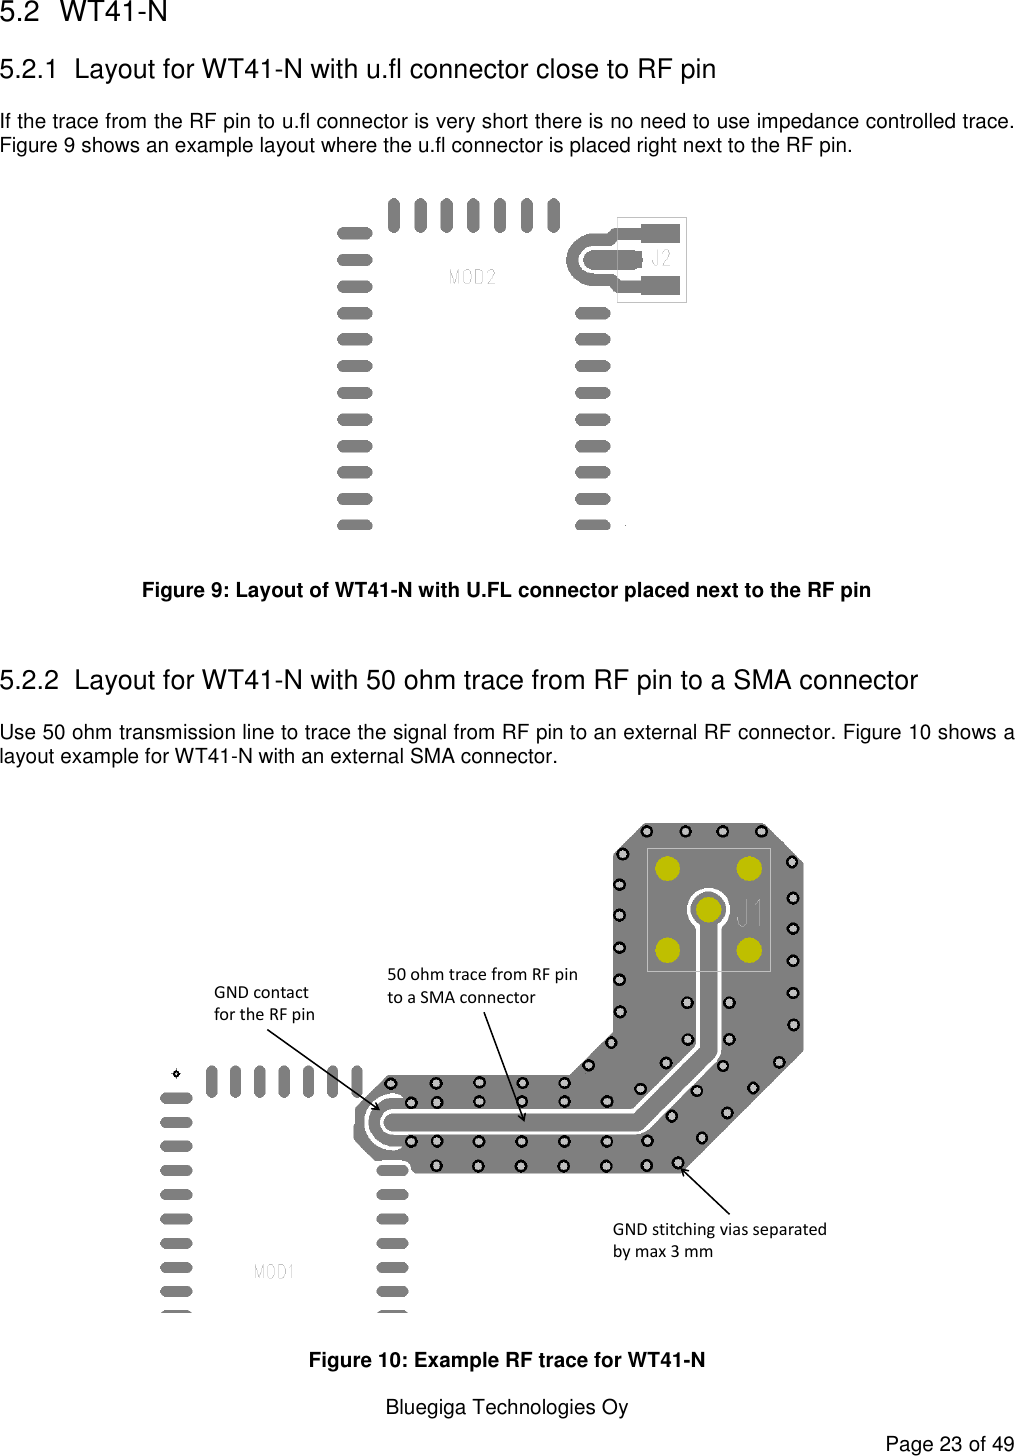   Bluegiga Technologies Oy Page 23 of 49 5.2  WT41-N 5.2.1  Layout for WT41-N with u.fl connector close to RF pin If the trace from the RF pin to u.fl connector is very short there is no need to use impedance controlled trace. Figure 9 shows an example layout where the u.fl connector is placed right next to the RF pin.   Figure 9: Layout of WT41-N with U.FL connector placed next to the RF pin  5.2.2  Layout for WT41-N with 50 ohm trace from RF pin to a SMA connector Use 50 ohm transmission line to trace the signal from RF pin to an external RF connector. Figure 10 shows a layout example for WT41-N with an external SMA connector.   GND stitching vias separated by max 3 mm50 ohm trace from RF pin to a SMA connectorGND contact for the RF pin Figure 10: Example RF trace for WT41-N 